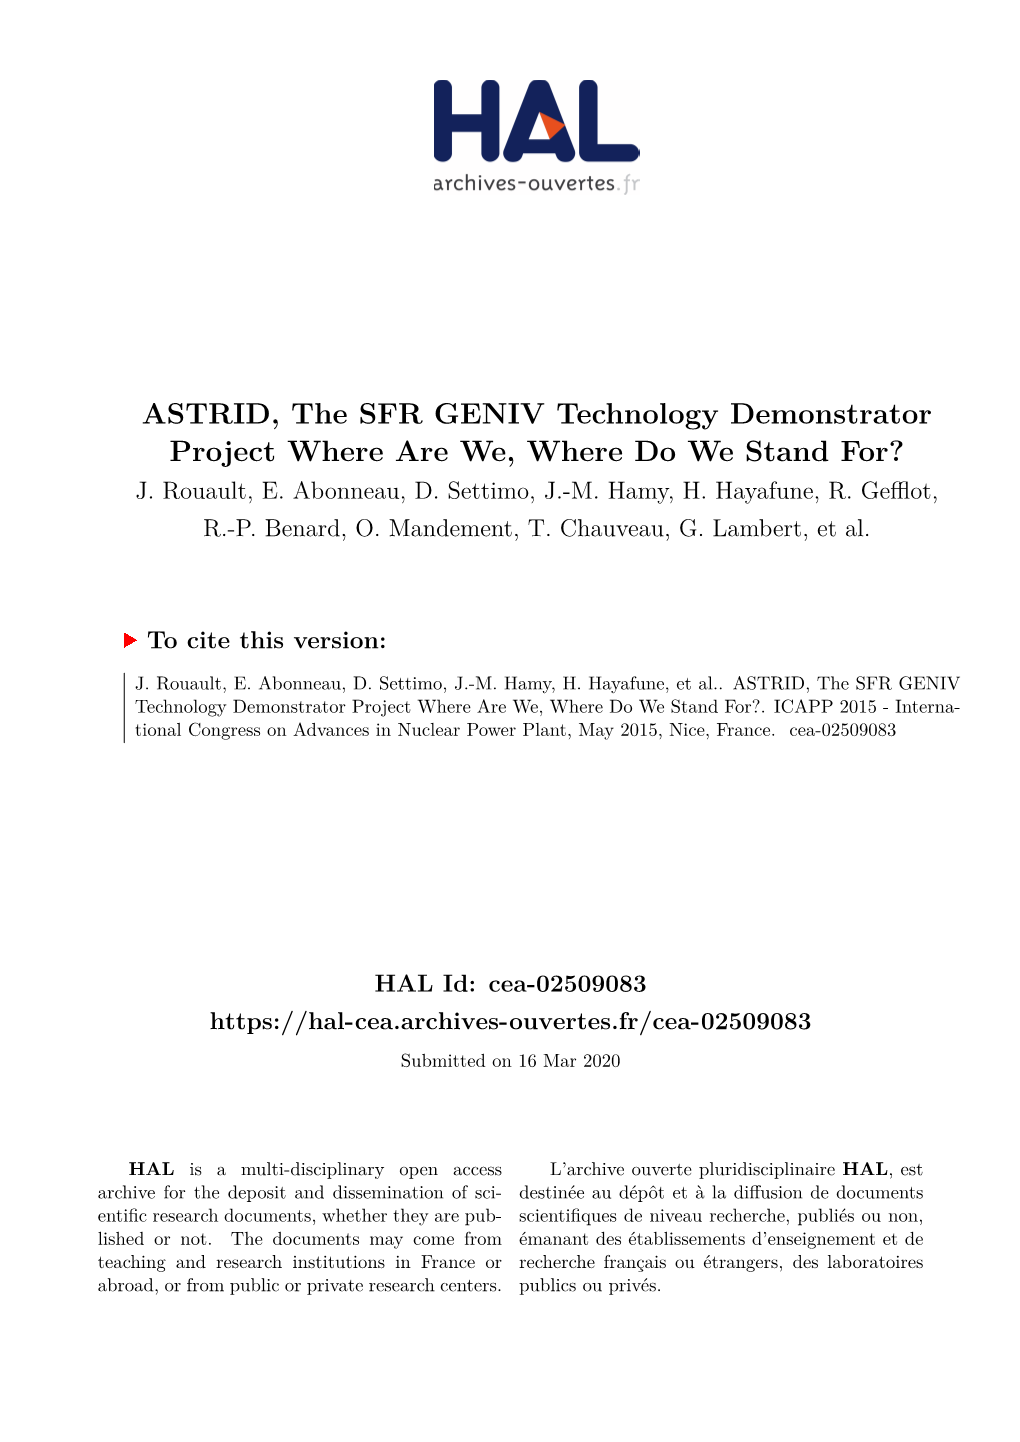 ASTRID, the SFR GENIV Technology Demonstrator Project Where Are We, Where Do We Stand For? J